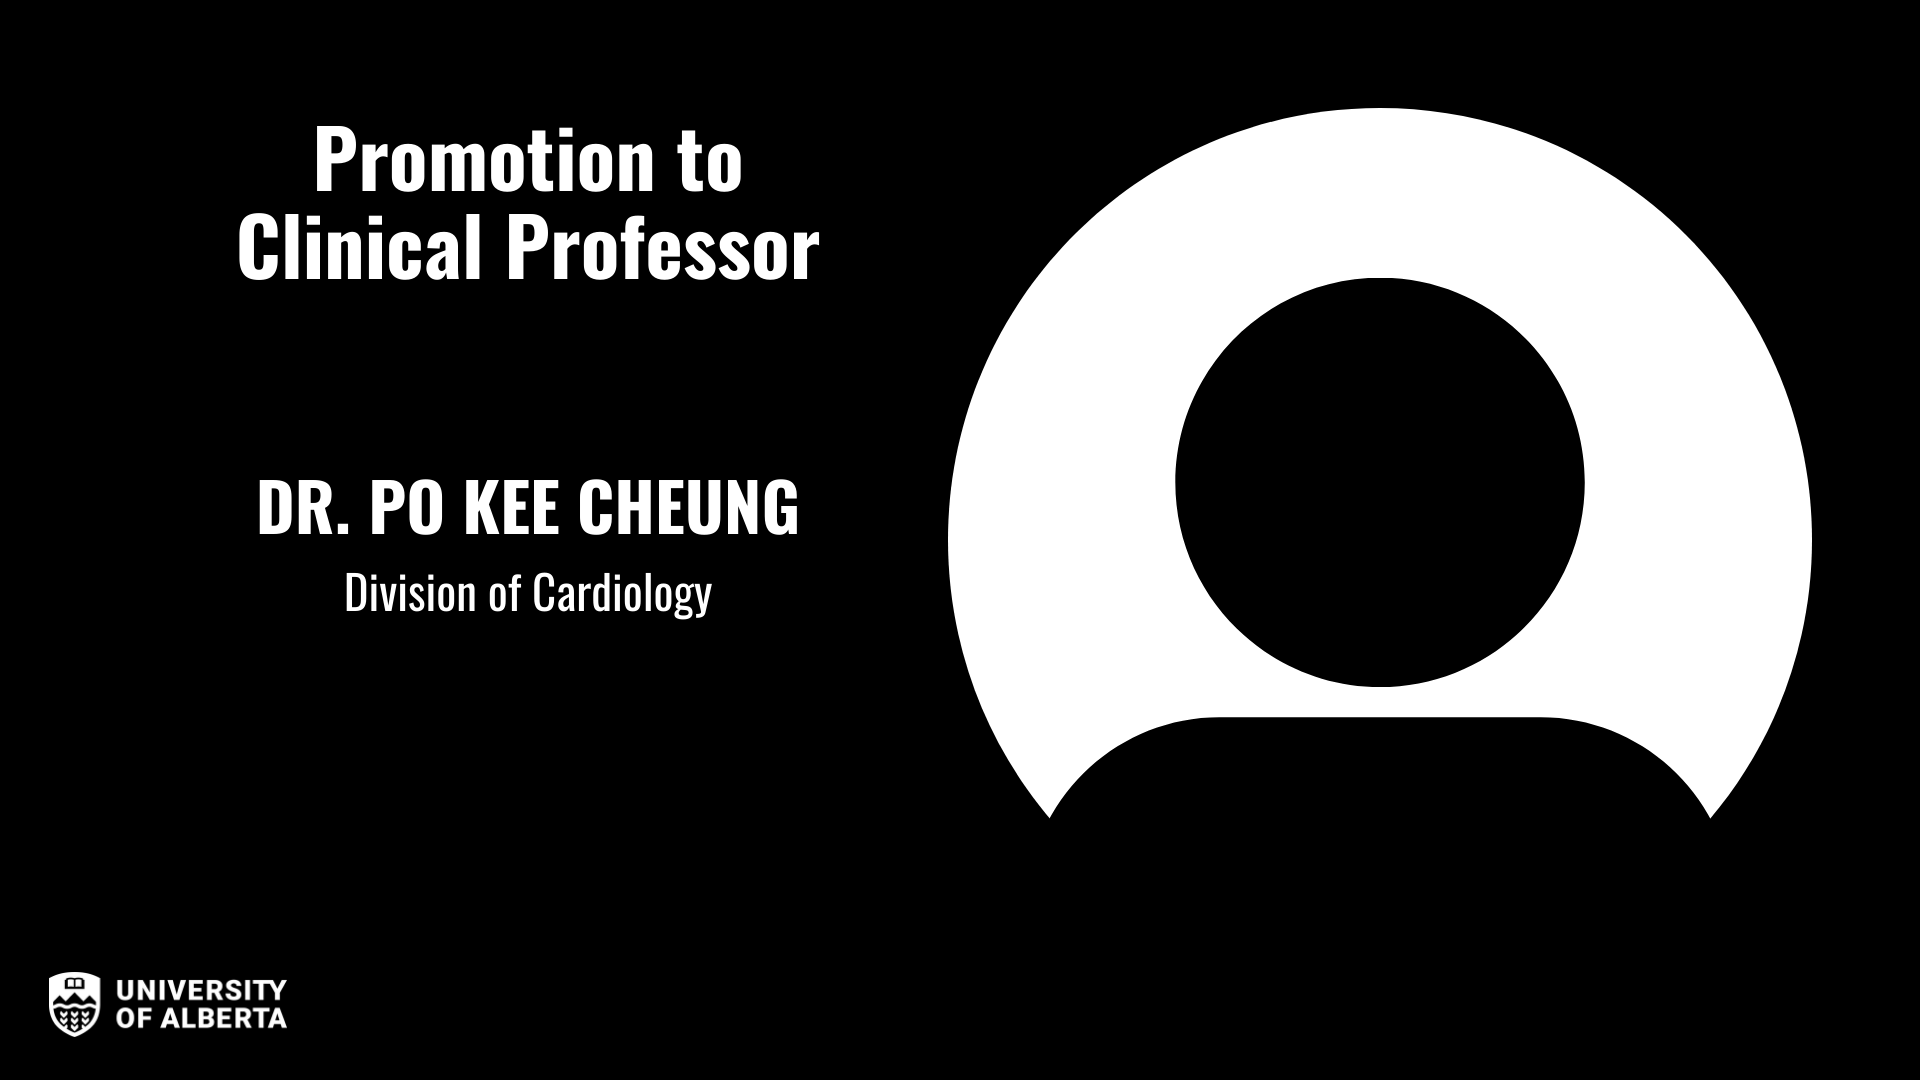 Dr. Po Kee Cheung